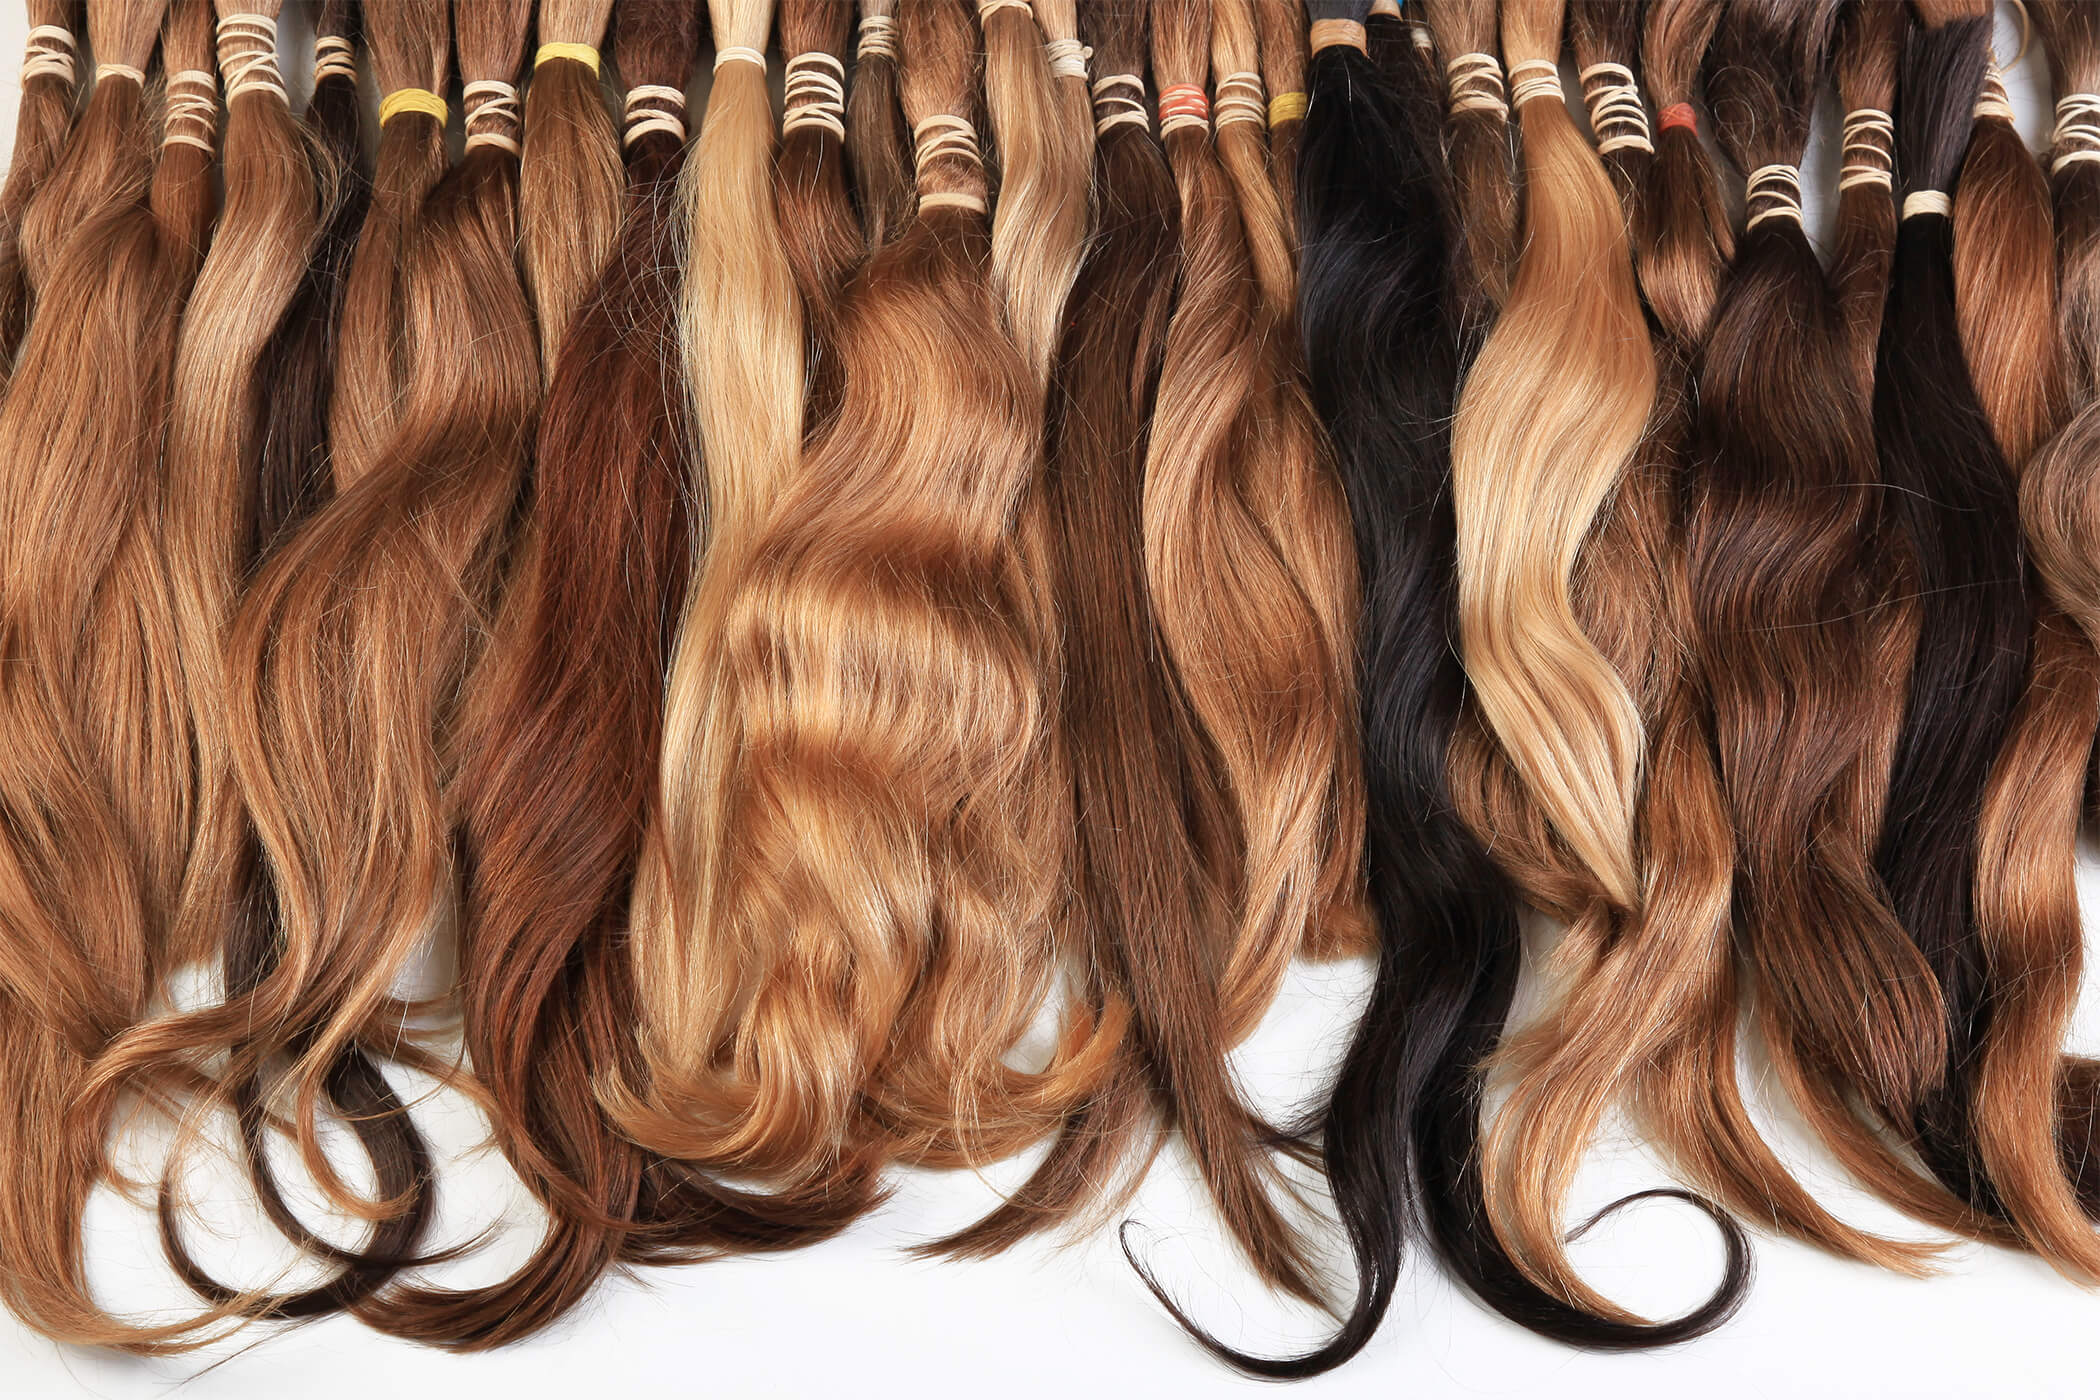 Take a look at our ultimate hair extensions guide to help you find the perf...